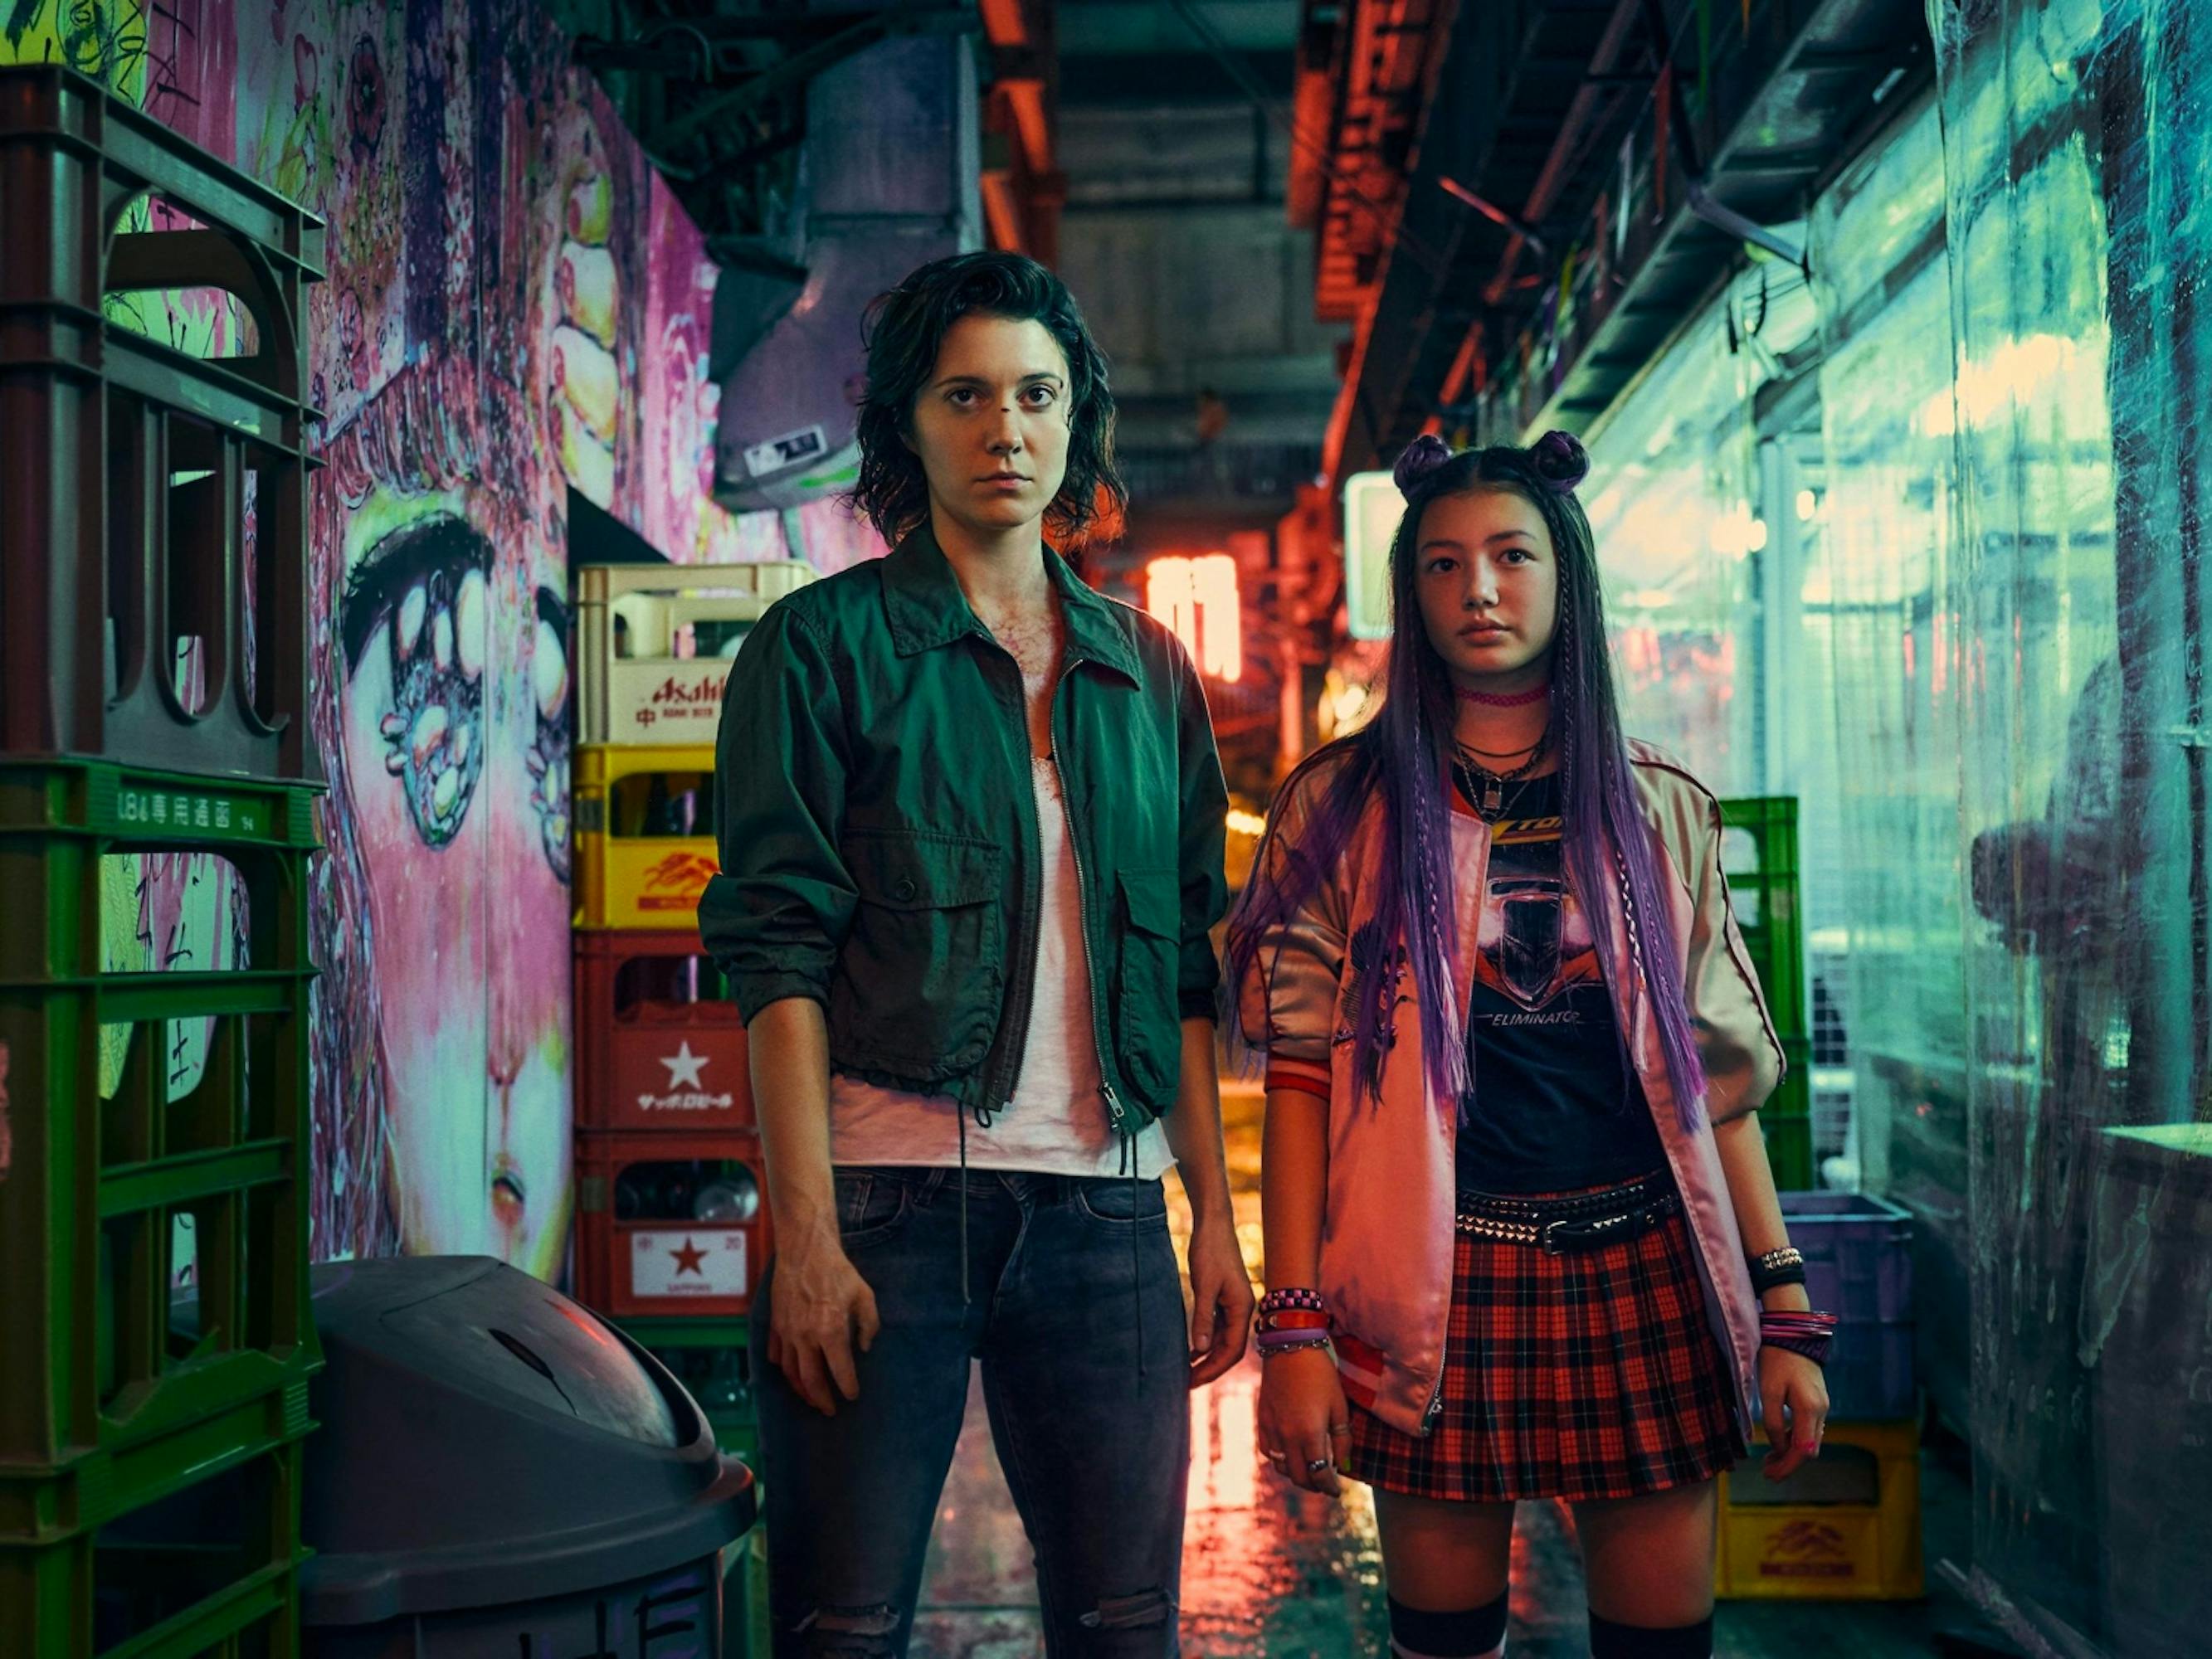 Kate (Mary Elizabeth Winstead) and Ani (Miku Martineau) stand in an alley crowded with stacked crates. On the left wall is a huge anime face, and on the right is hanging plastic. Kate wears jeans and a green jacket, and Ani wears a plaid skirt, pink jacket, and has purple hair.